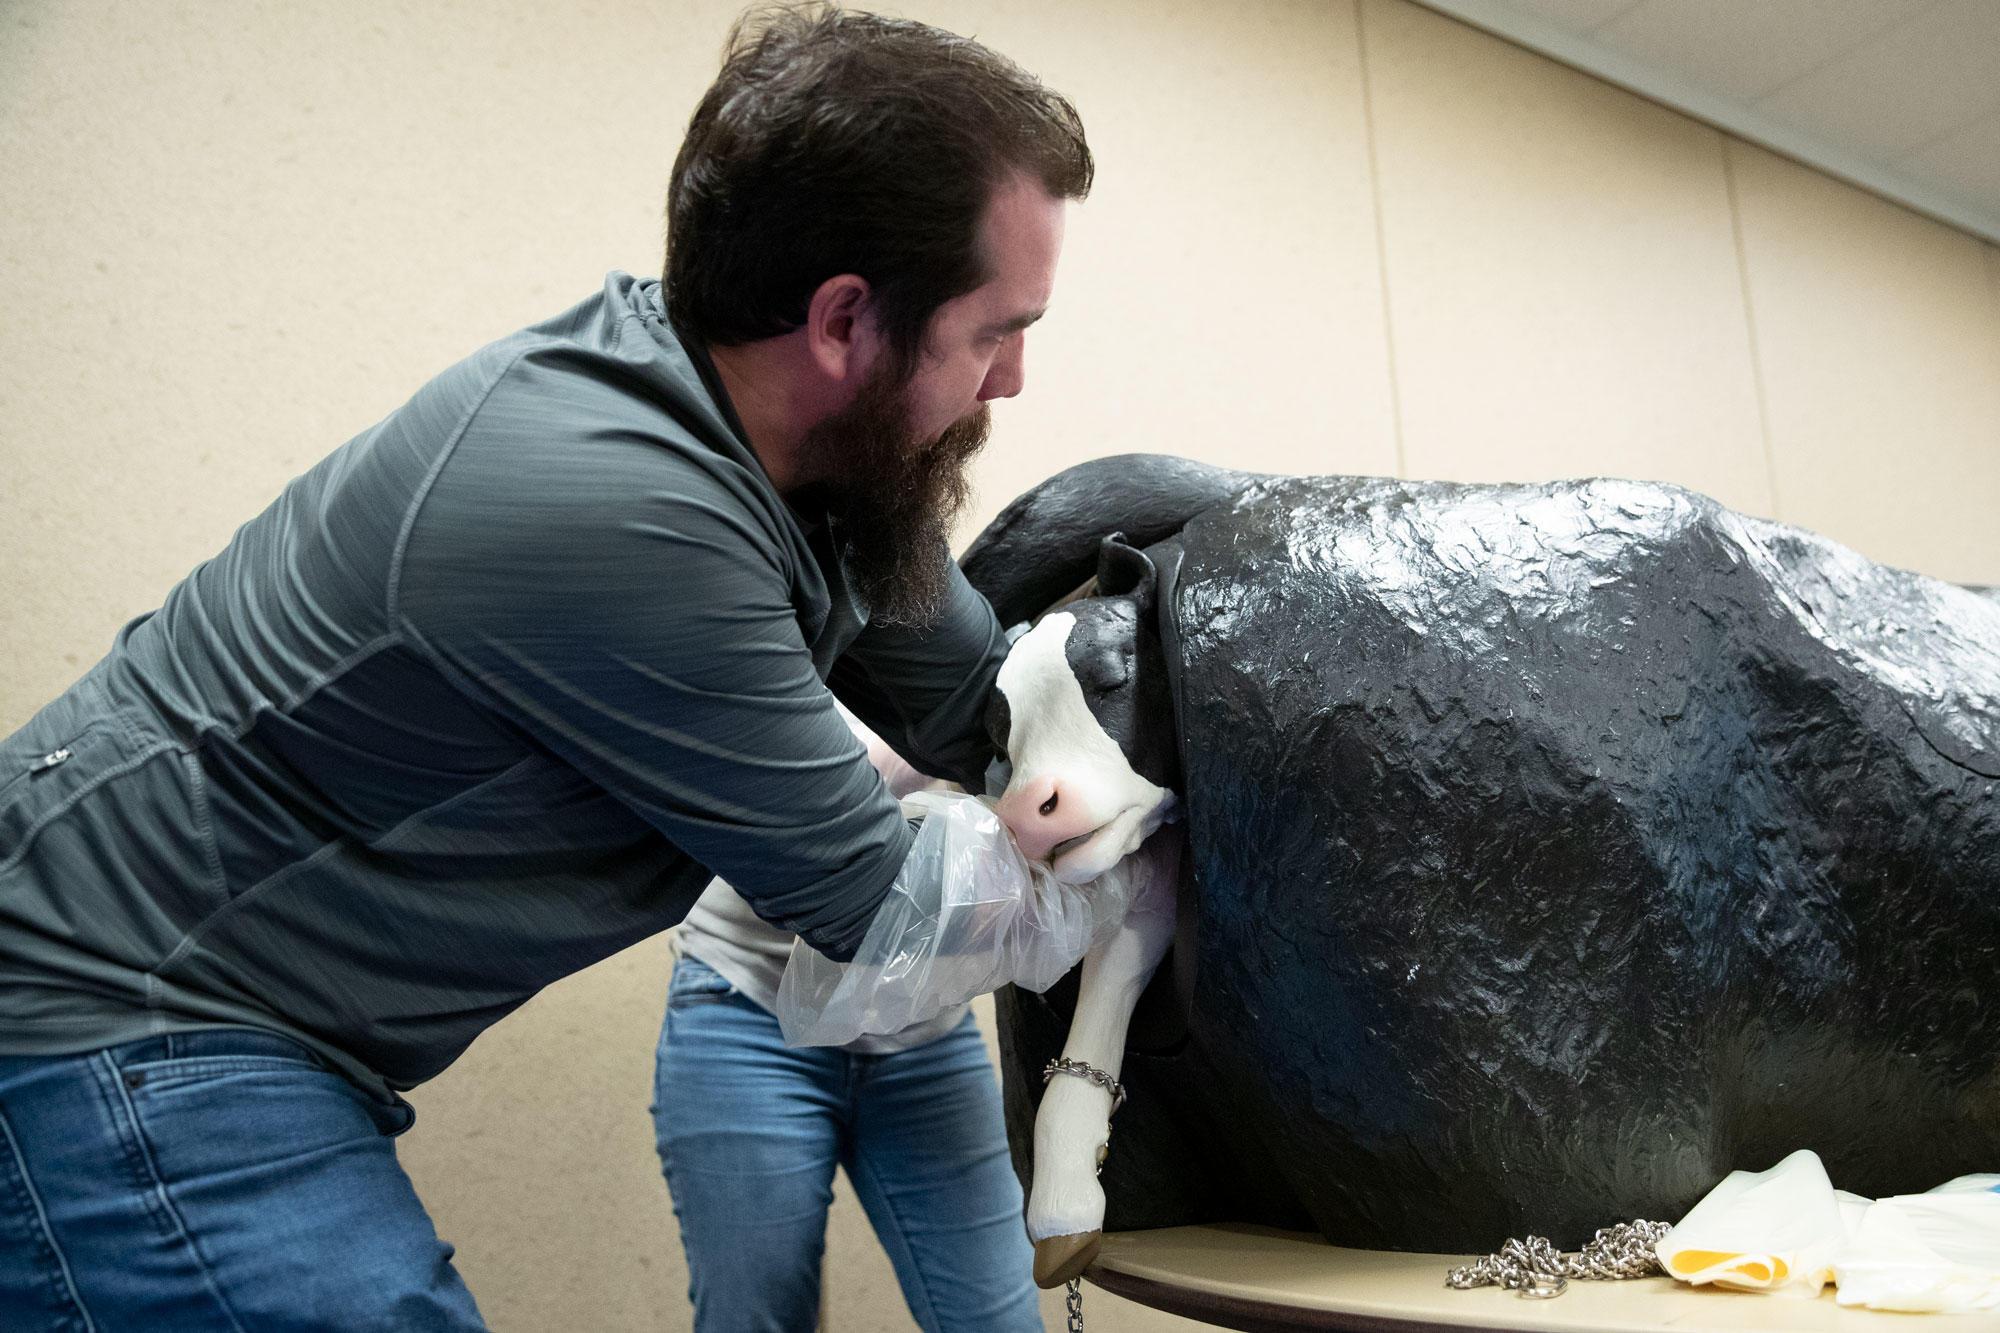 A man is pulling an artificial black-and-white calf out of a black model cow that simulates brth.